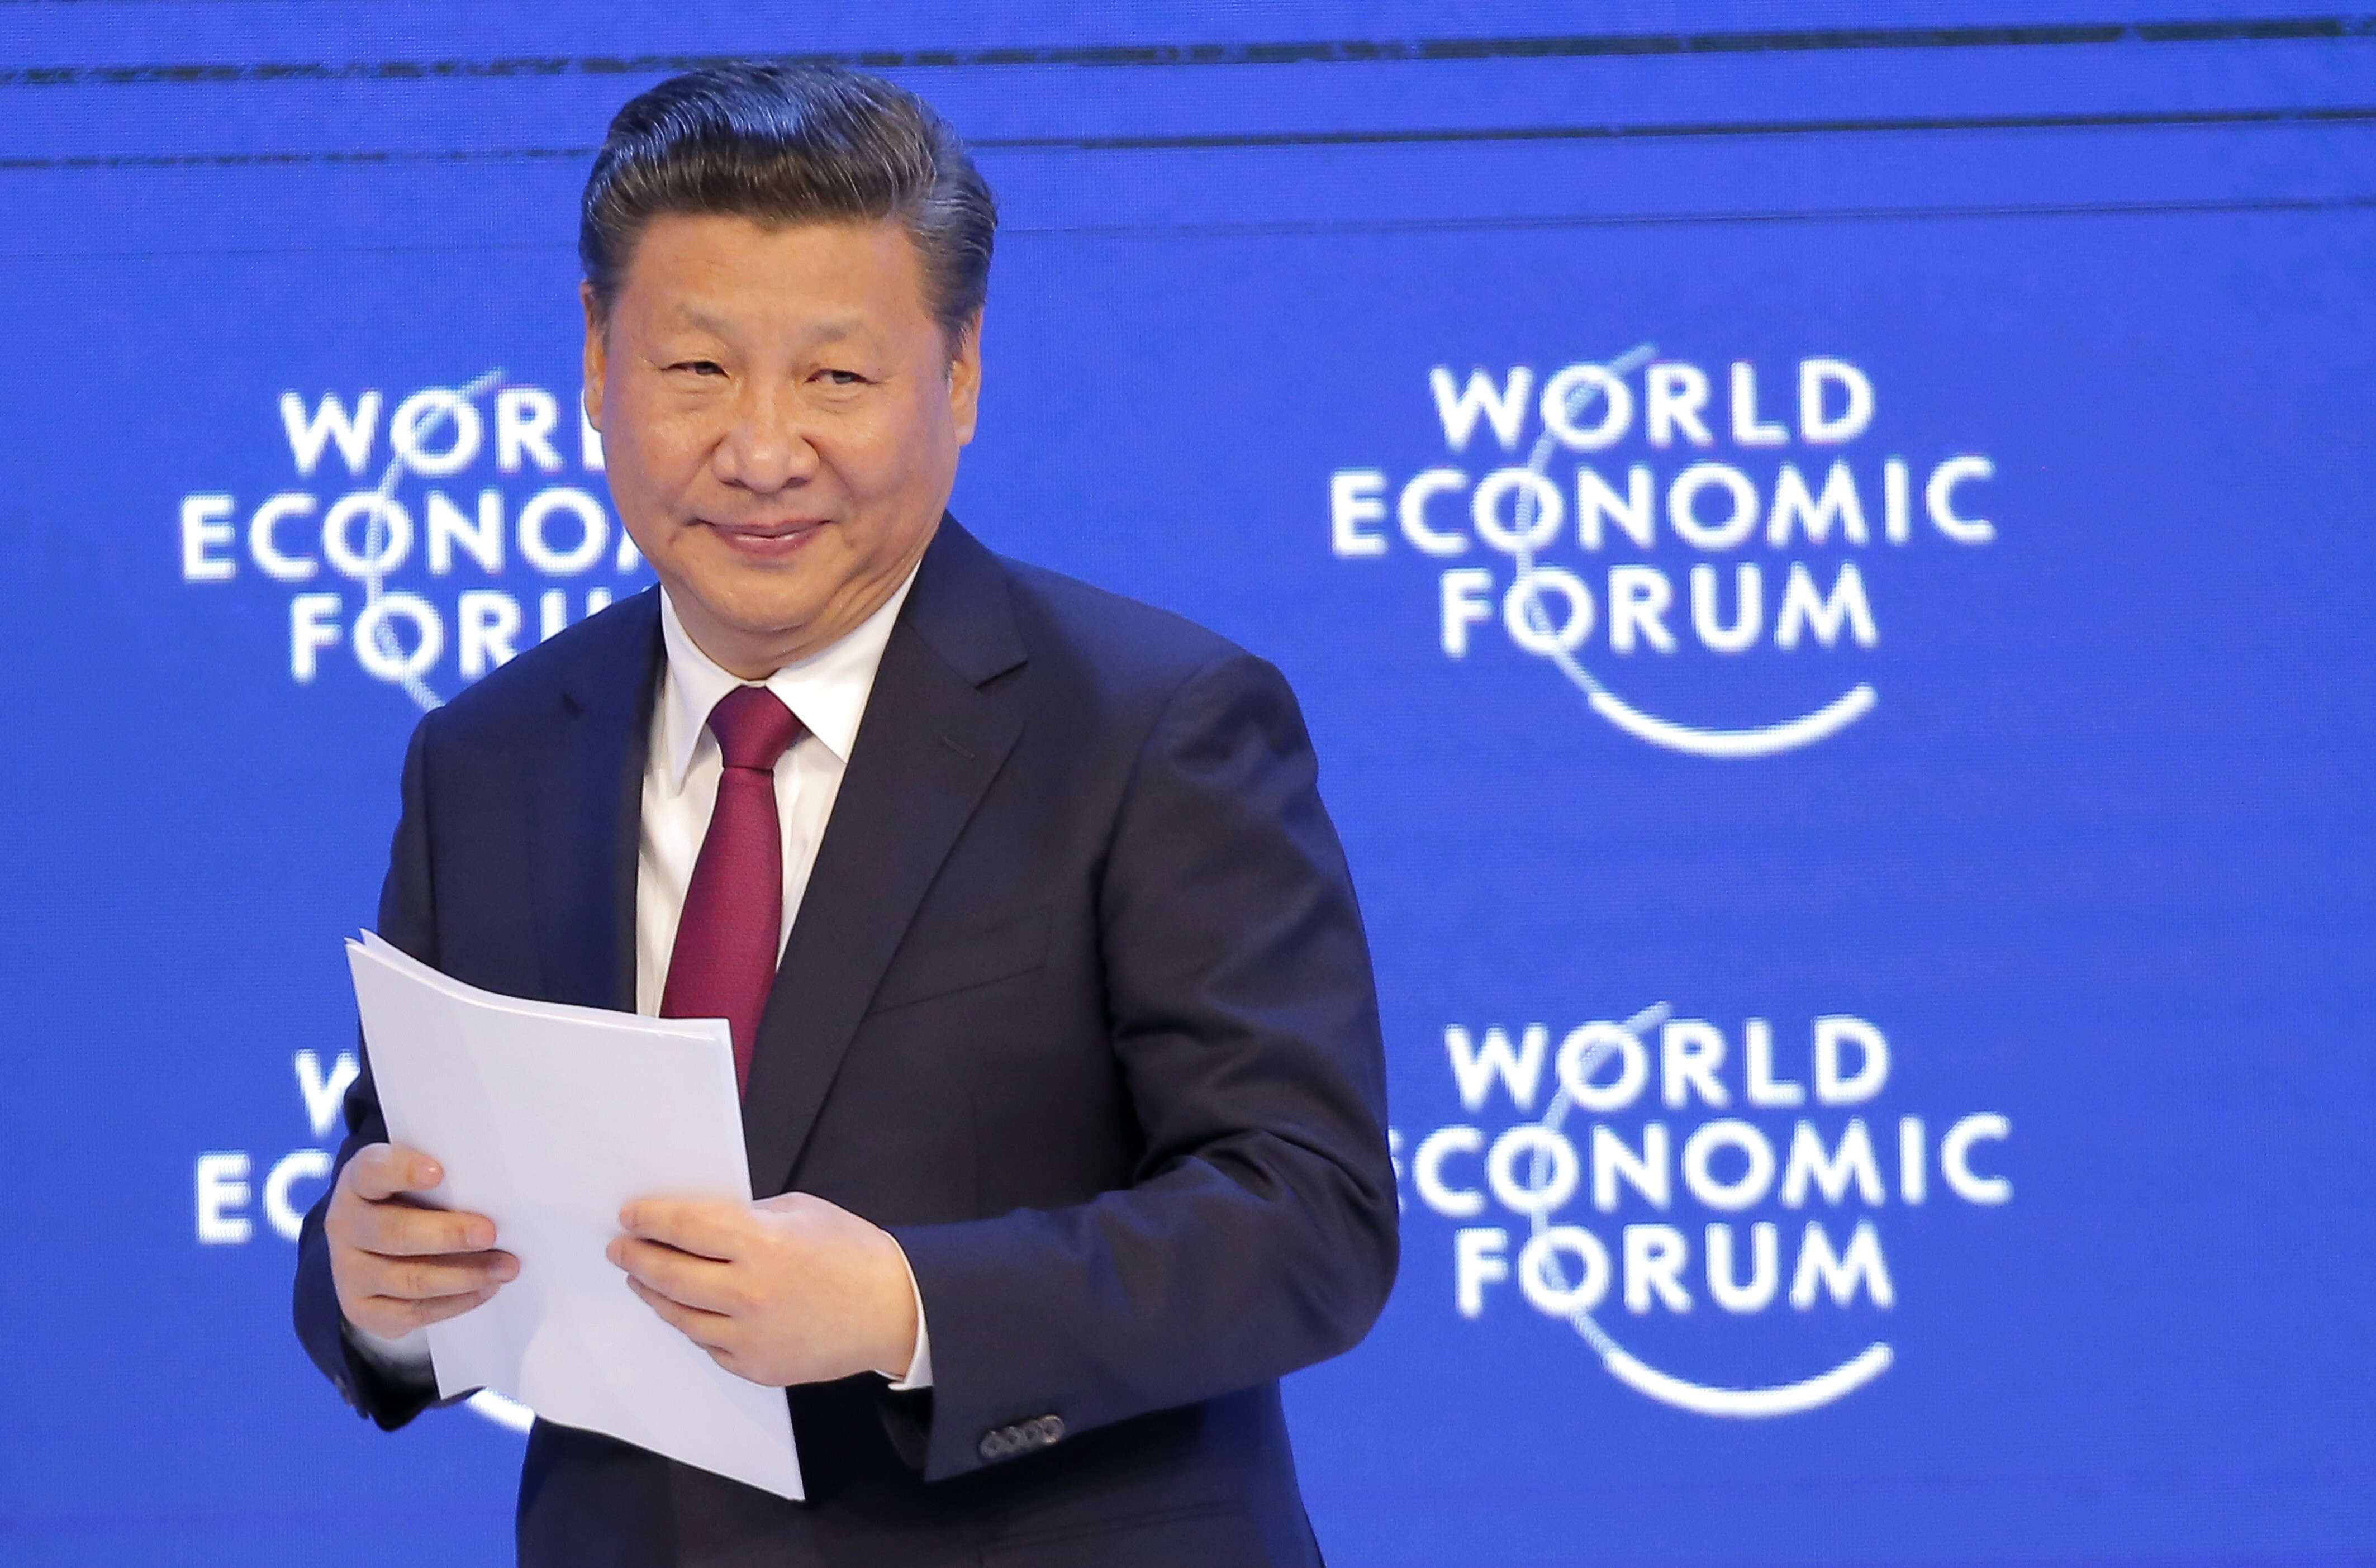 President Xi Jinping is expected to use his speech at Davos to review China’s success in combating the coronavirus and call for greater policy cooperation on global issues. Photo: AP